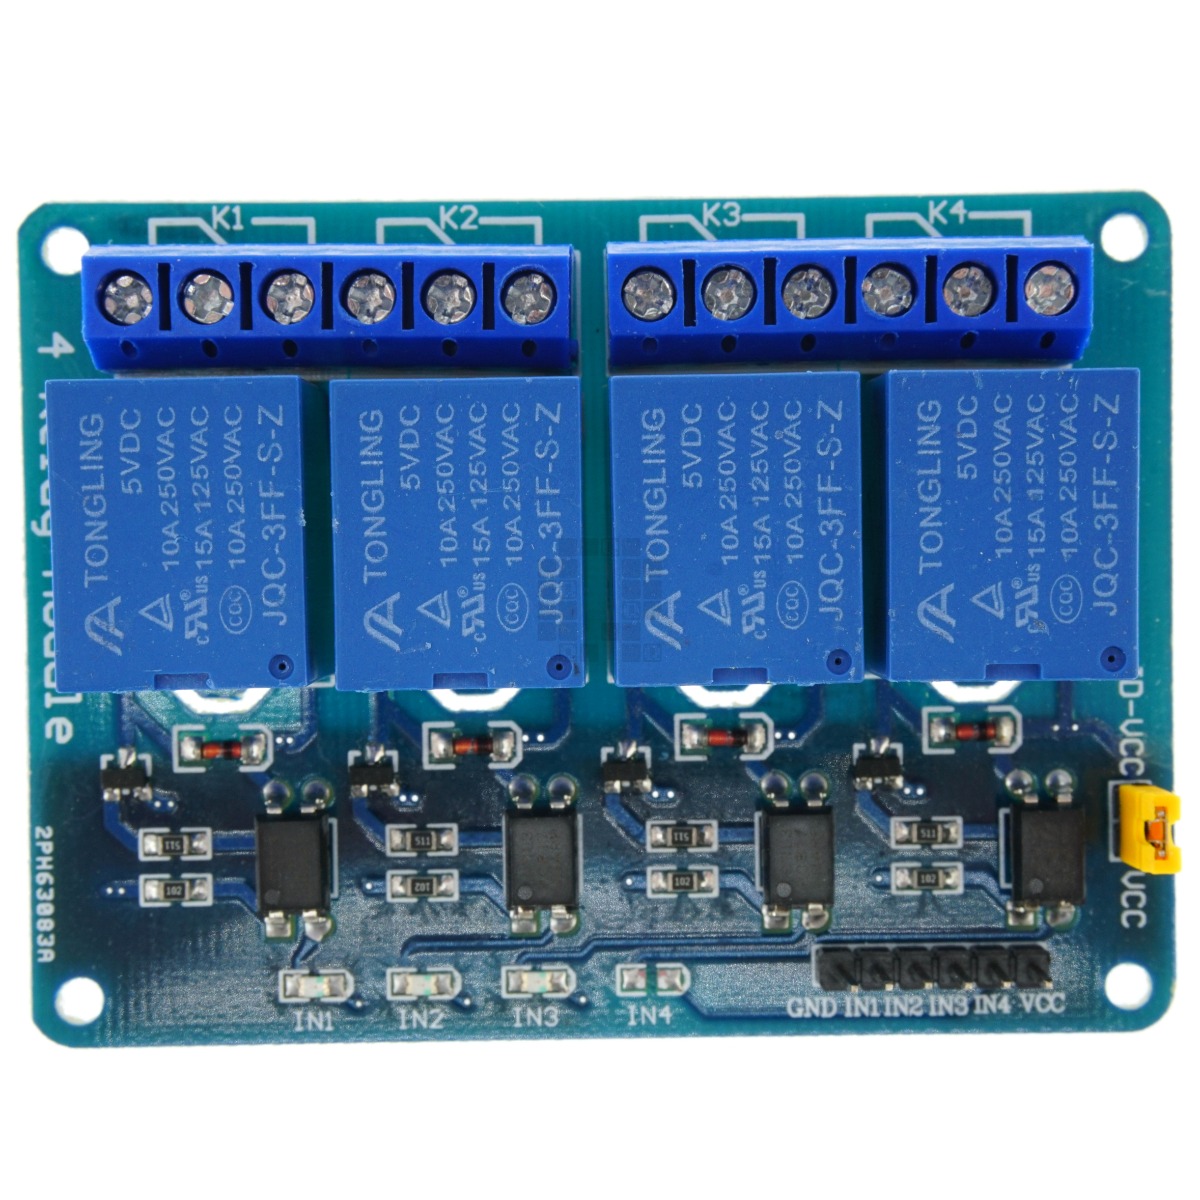 Geekcreit 4 Channel Isolated Relay Module, 5V, SPDT Output